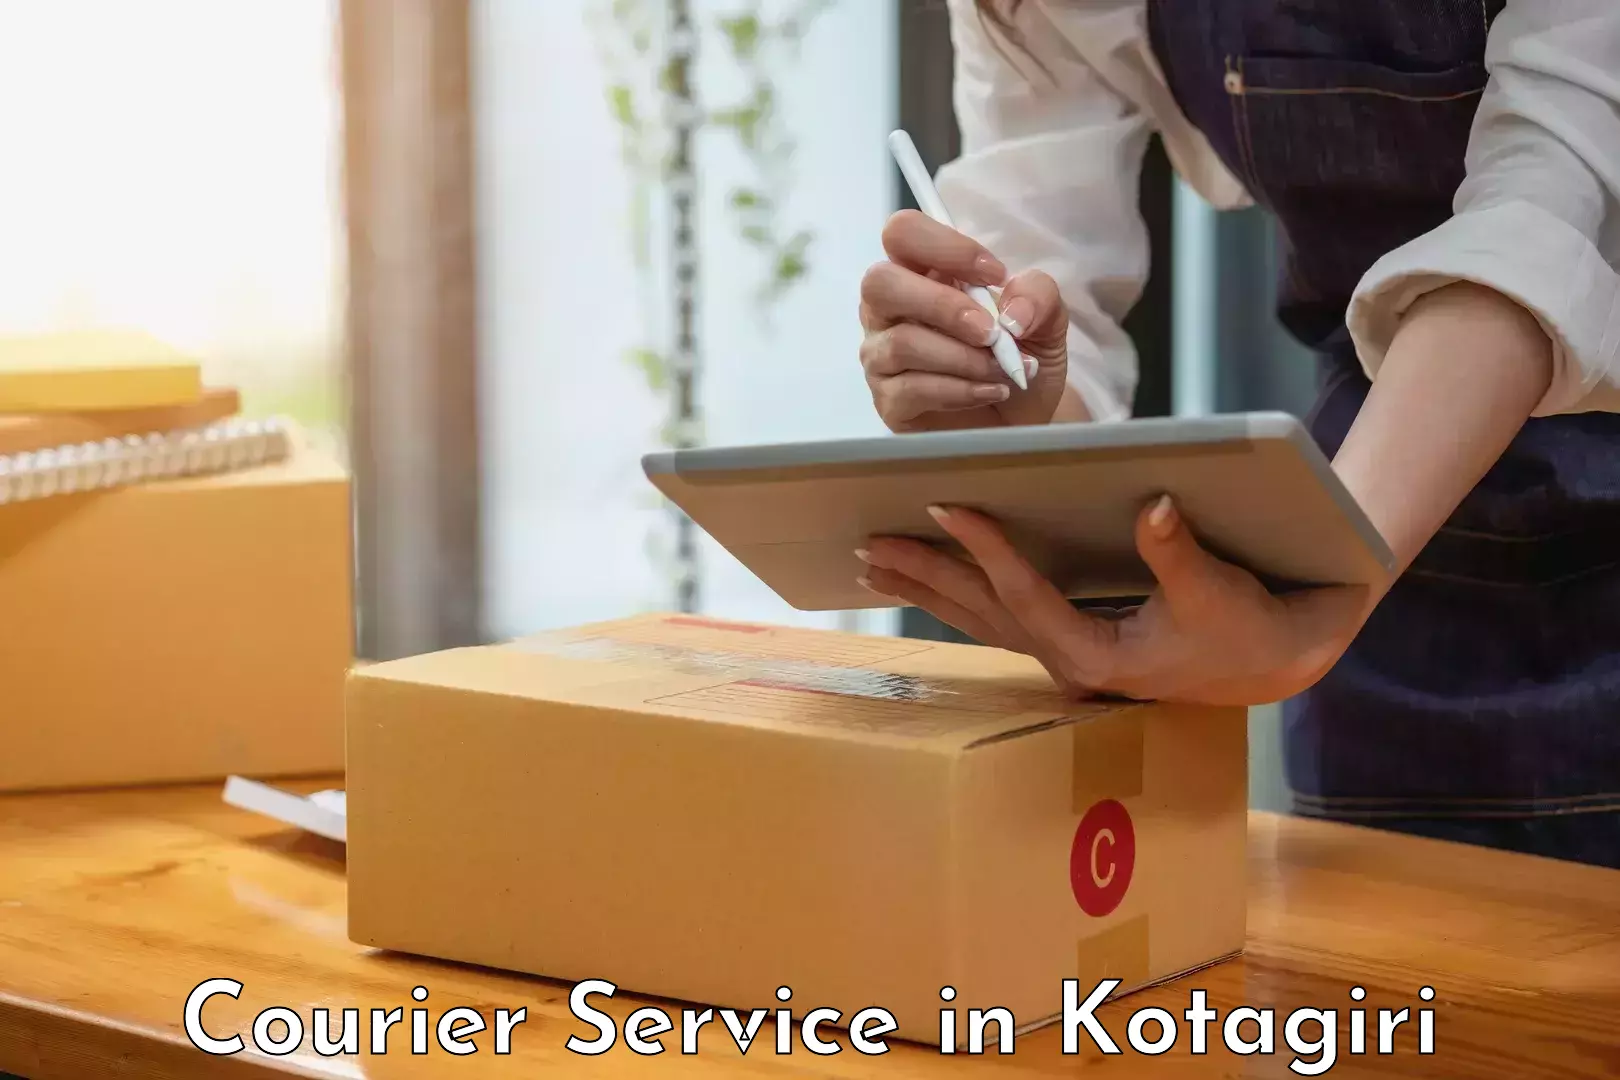 Personal courier services in Kotagiri